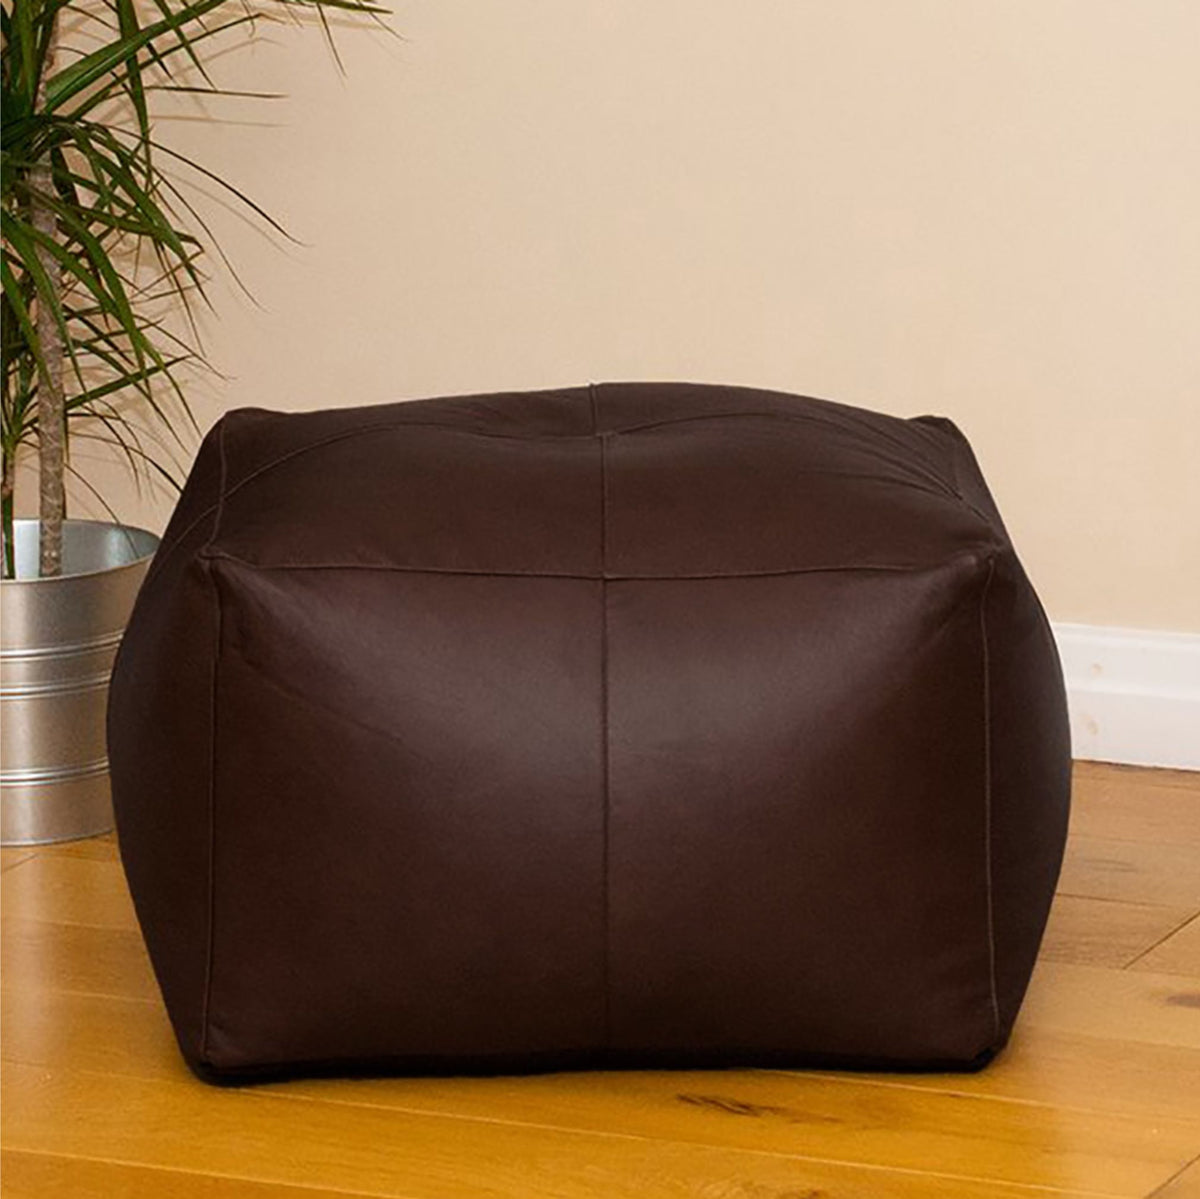 Genuine Cowhide Leather Square Ottoman Pouf Footrest Brown SkinOutfit